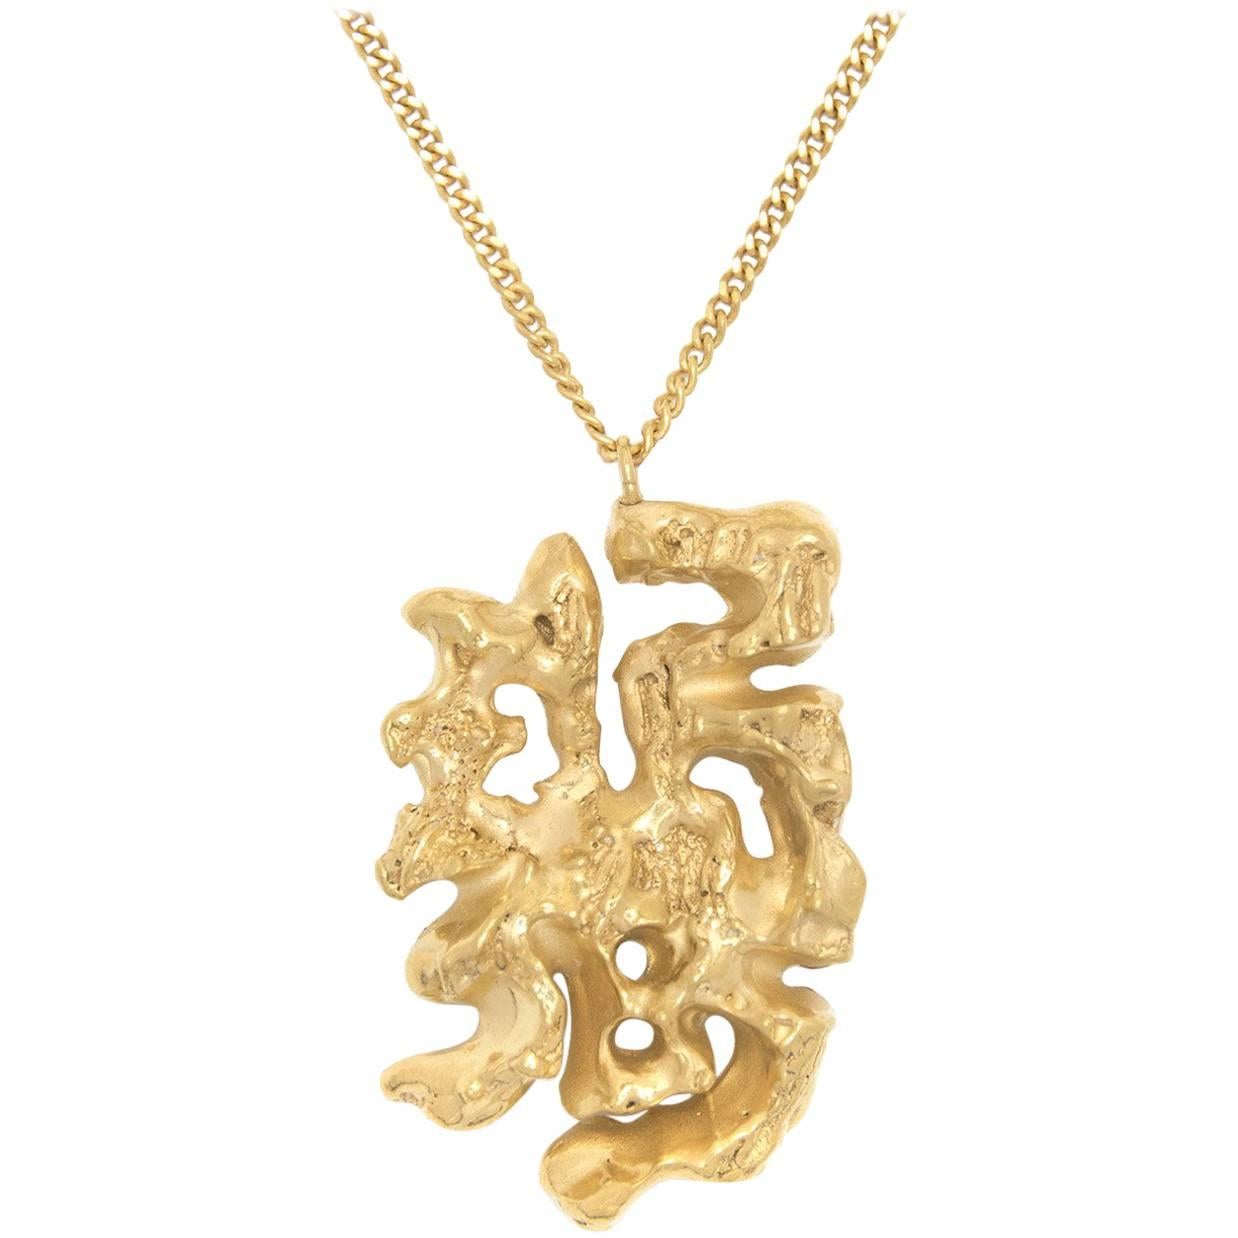 Loveness Lee - Chinese Zodiac Dog - Horoscope Gold Pendant Necklace For Sale